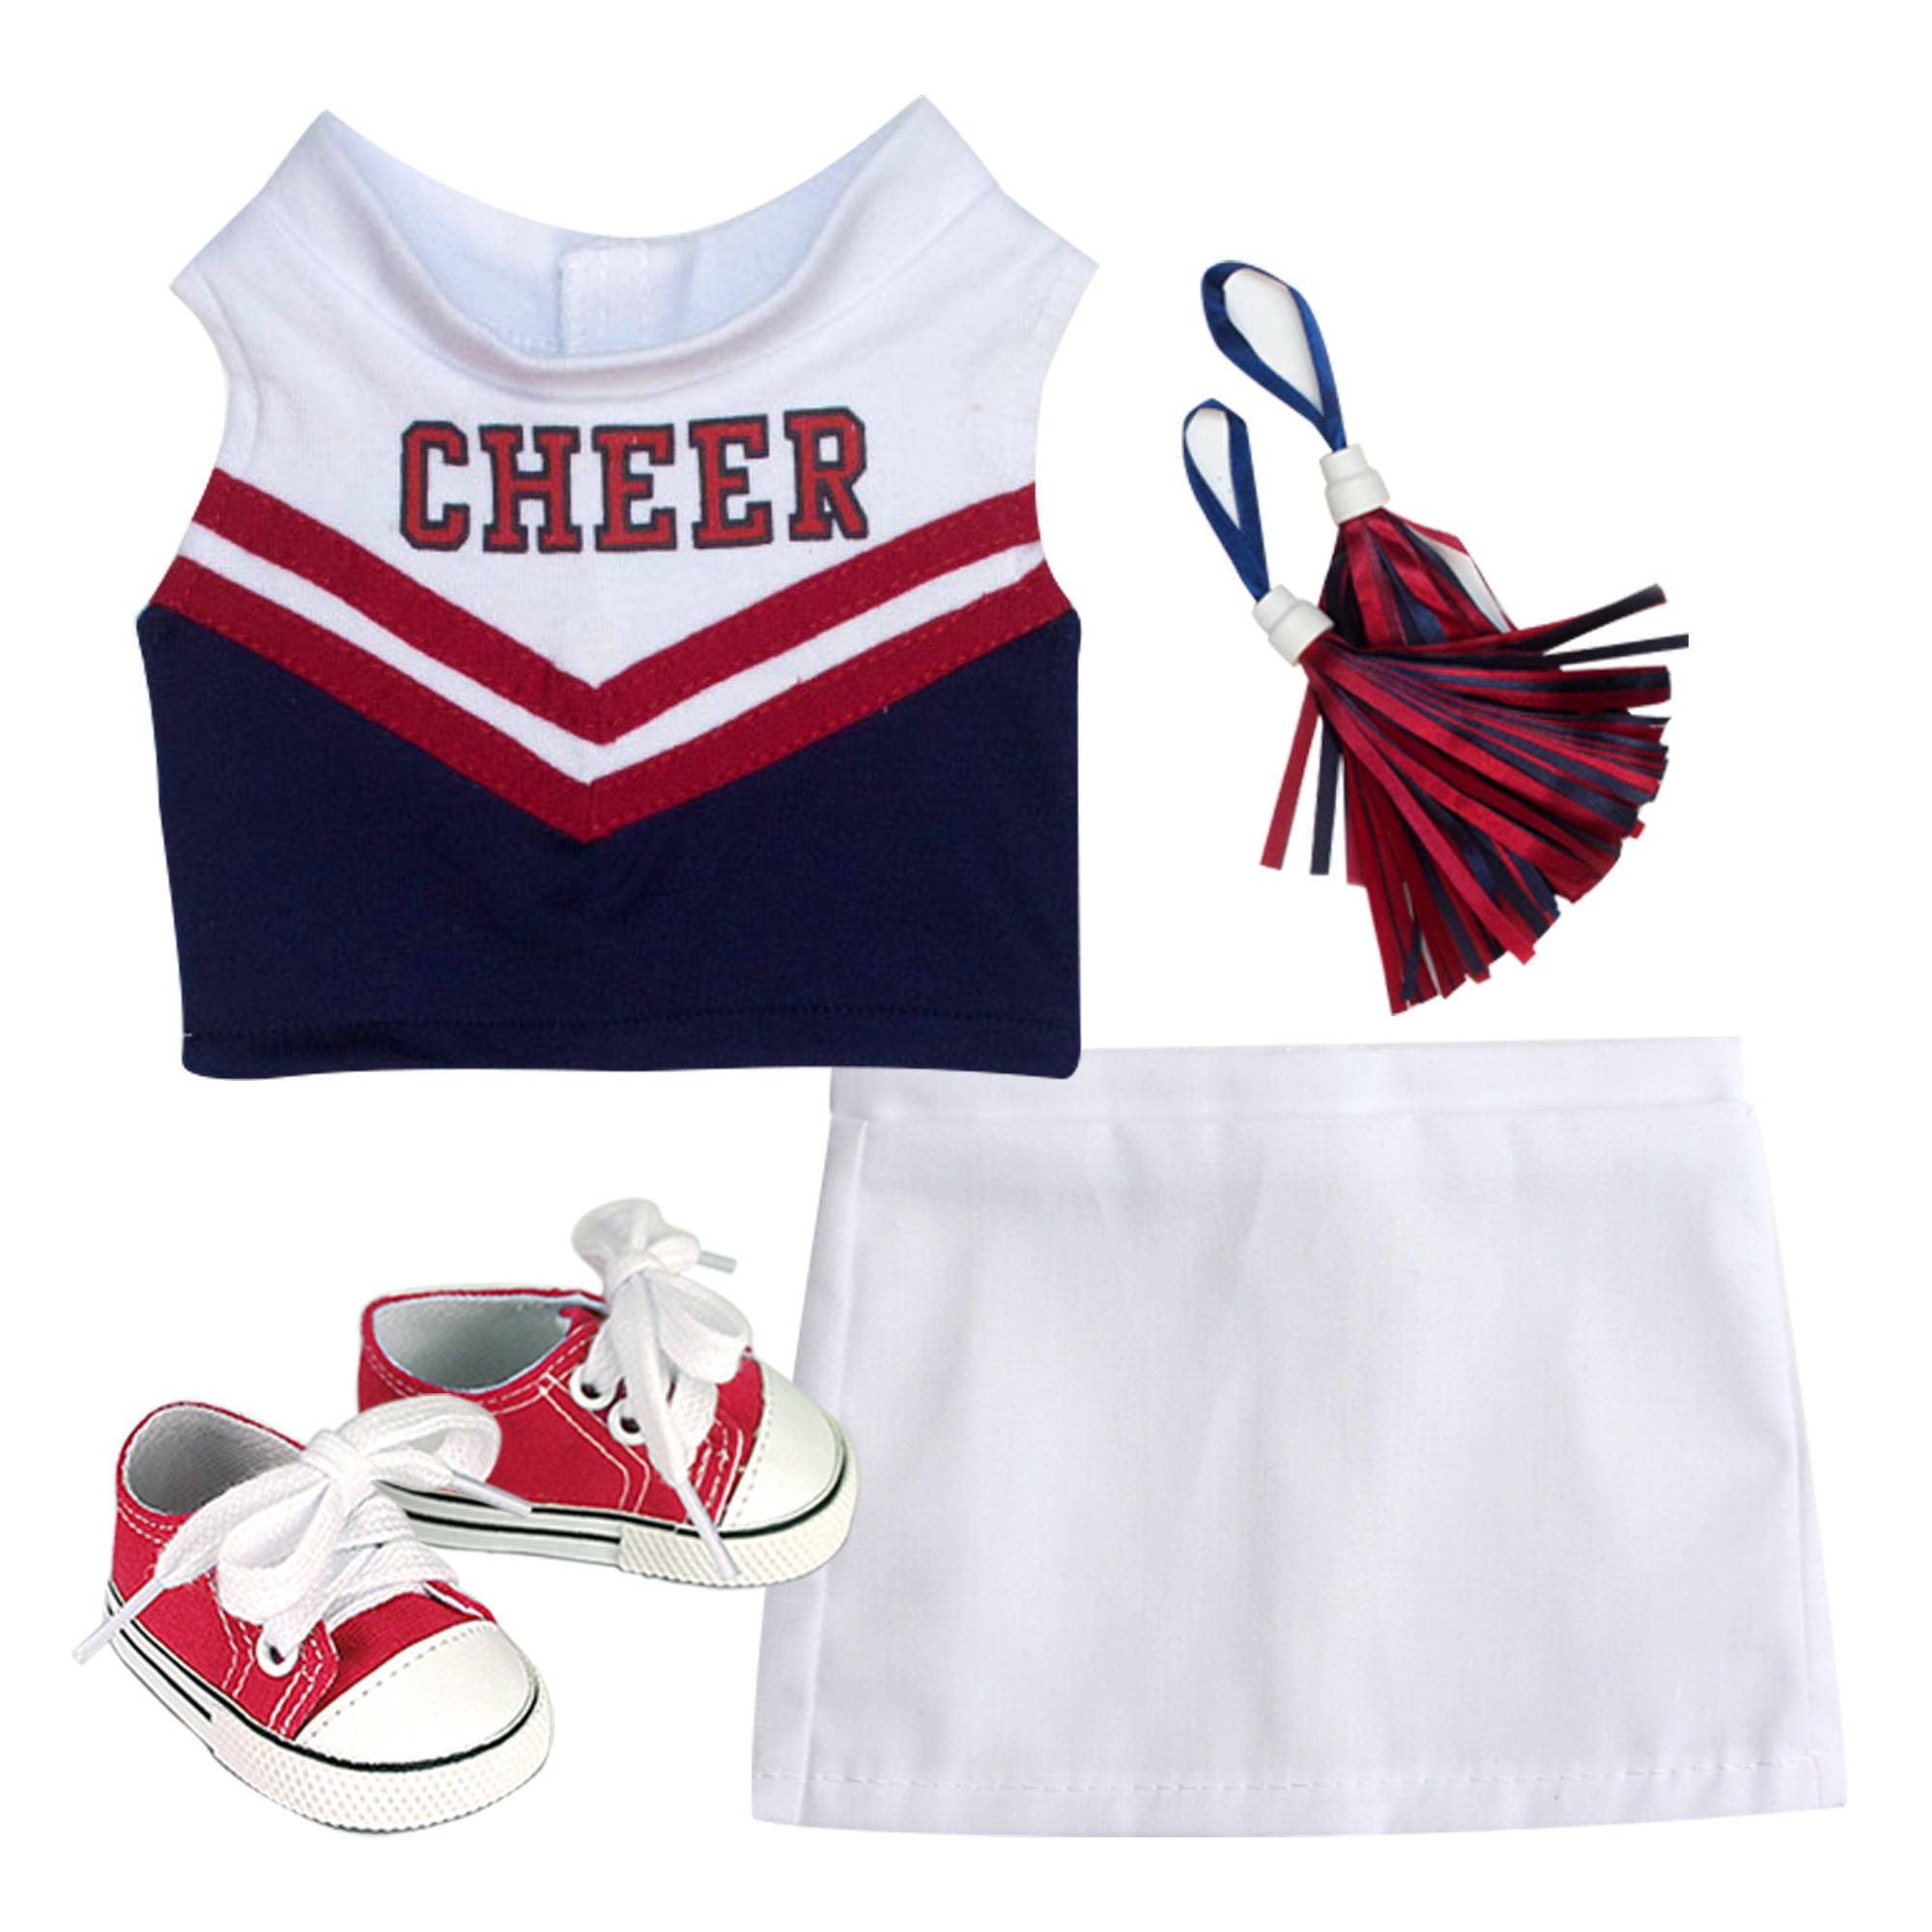 American Fashion World Cheerleading Outfit with Accessories Made for 18  inch Dolls Such as American Girl Dolls - Cheerleading Outfit with  Accessories Made for 18 inch Dolls Such as American Girl Dolls .